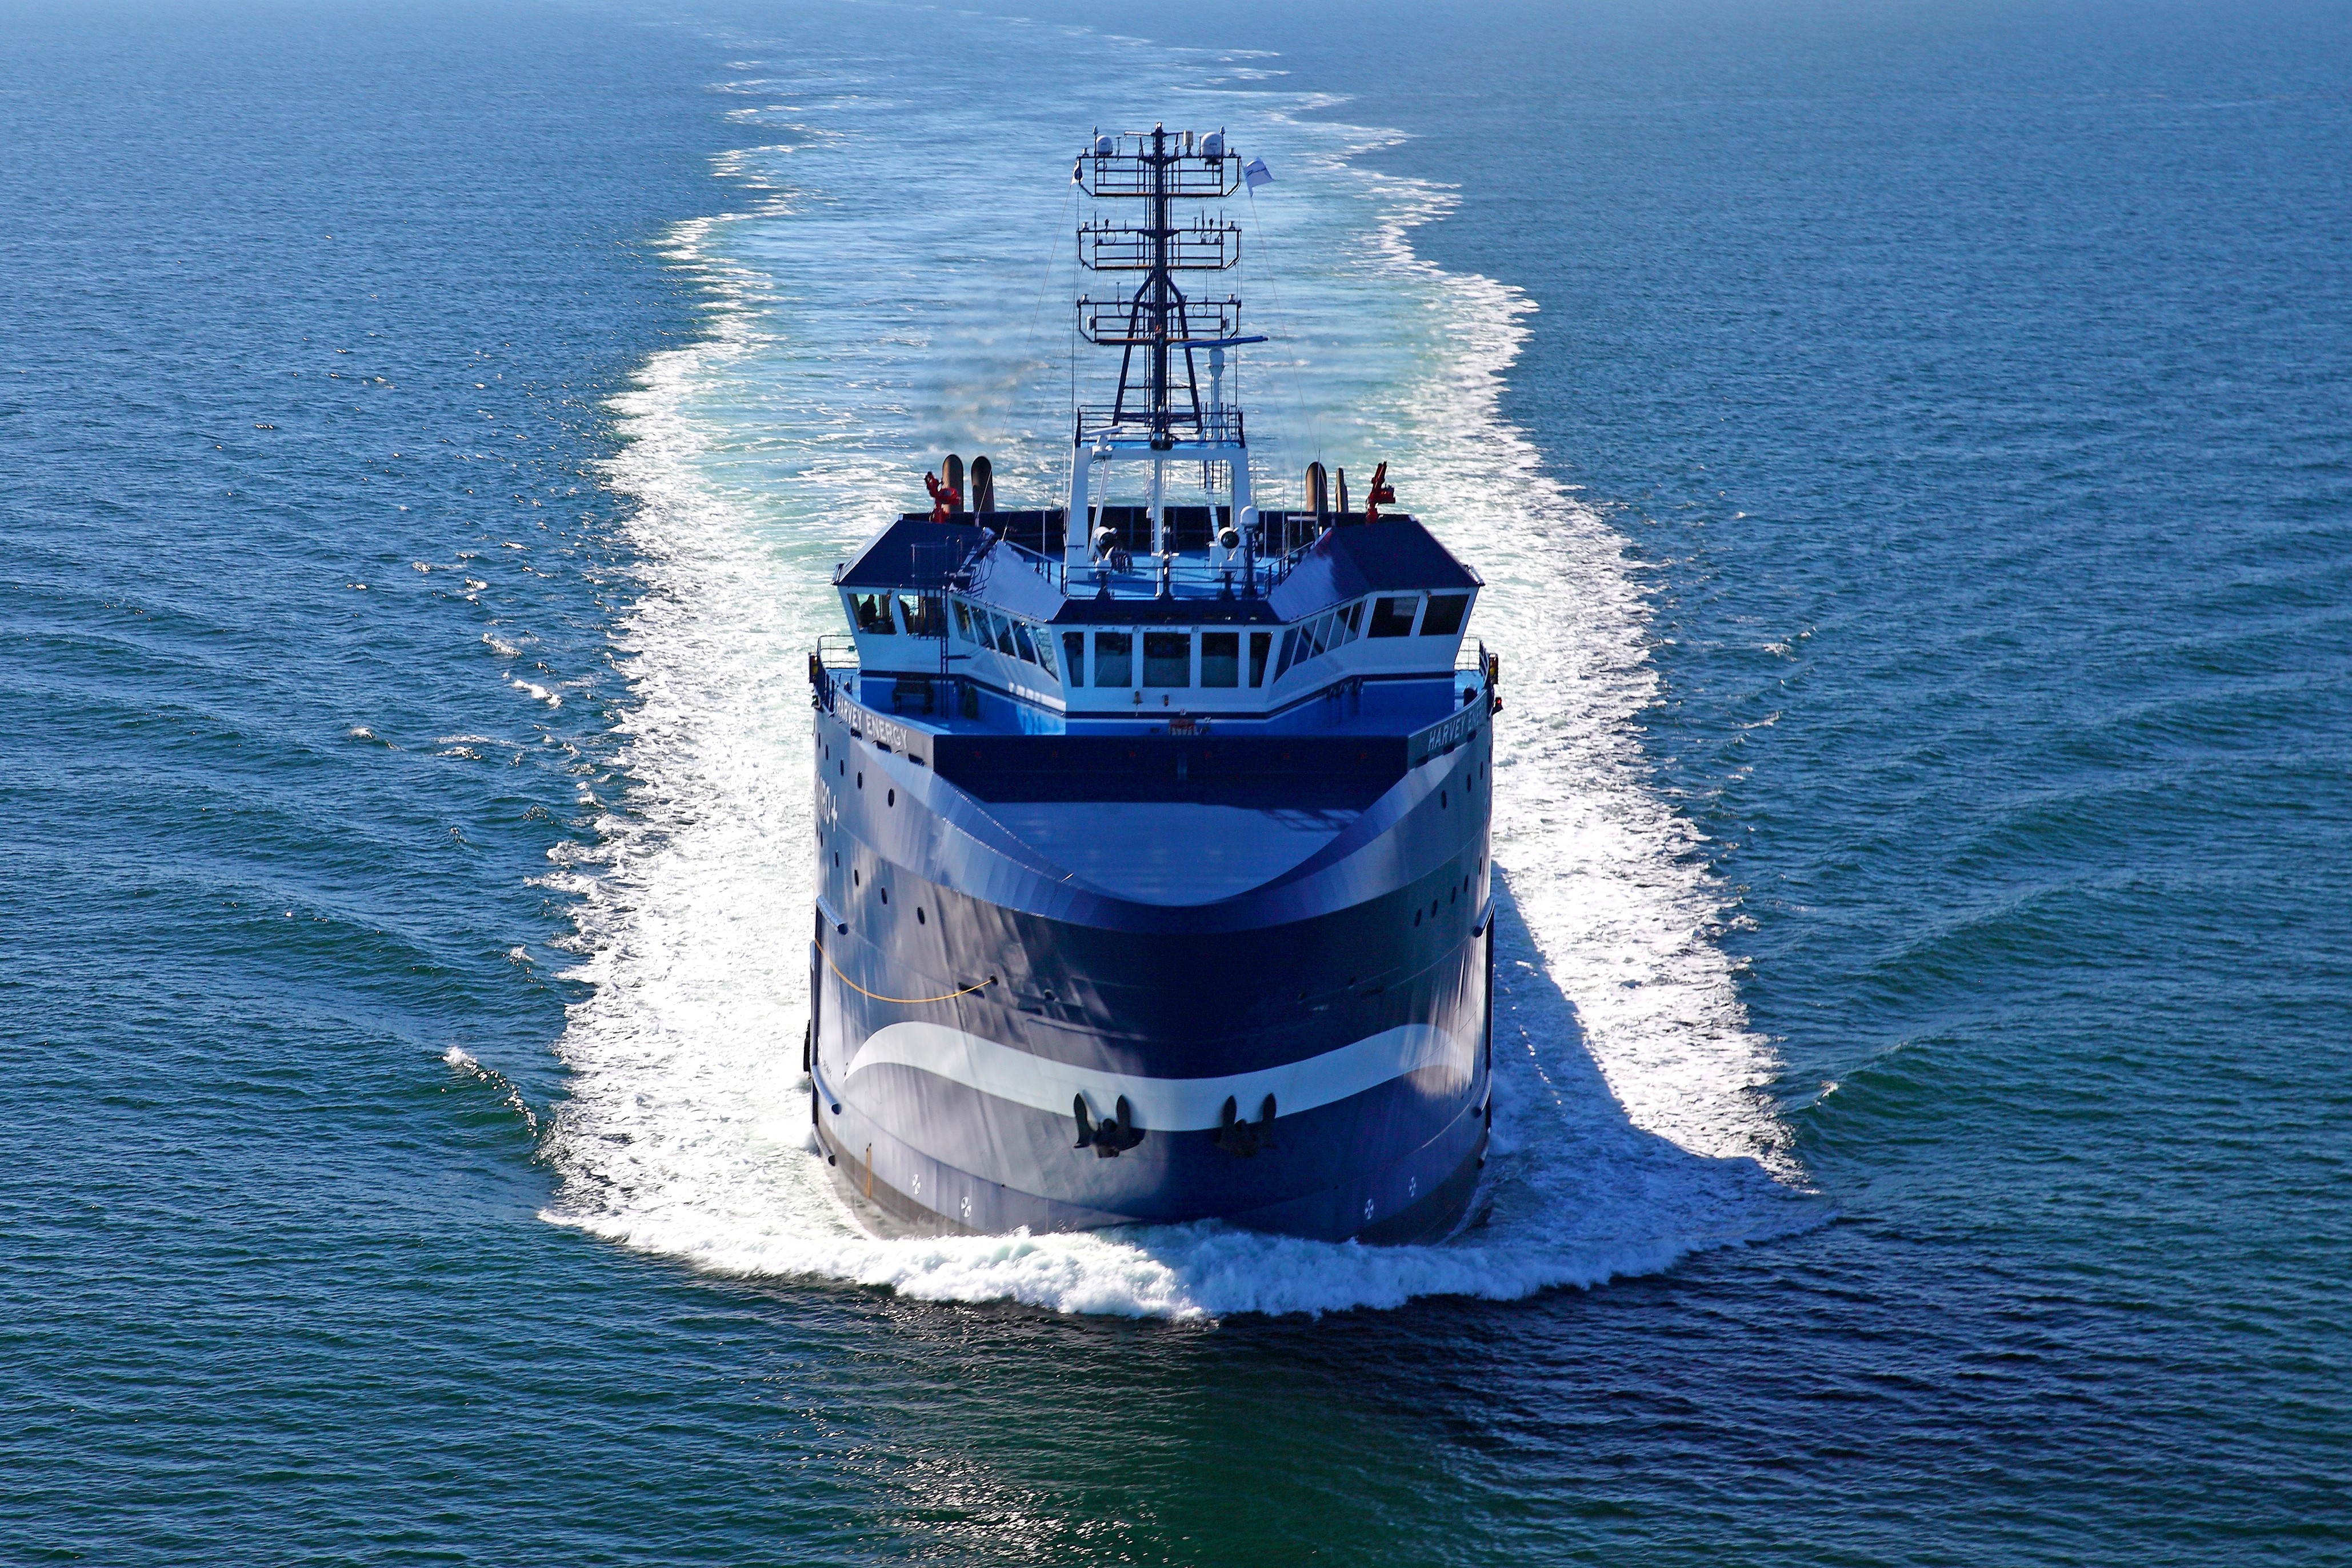 Harvey Gulf International Marine, the New Orleans-based LNG-powered PSV owner and LNG bunkering pioneer, has reached a new milestone with its fleet.